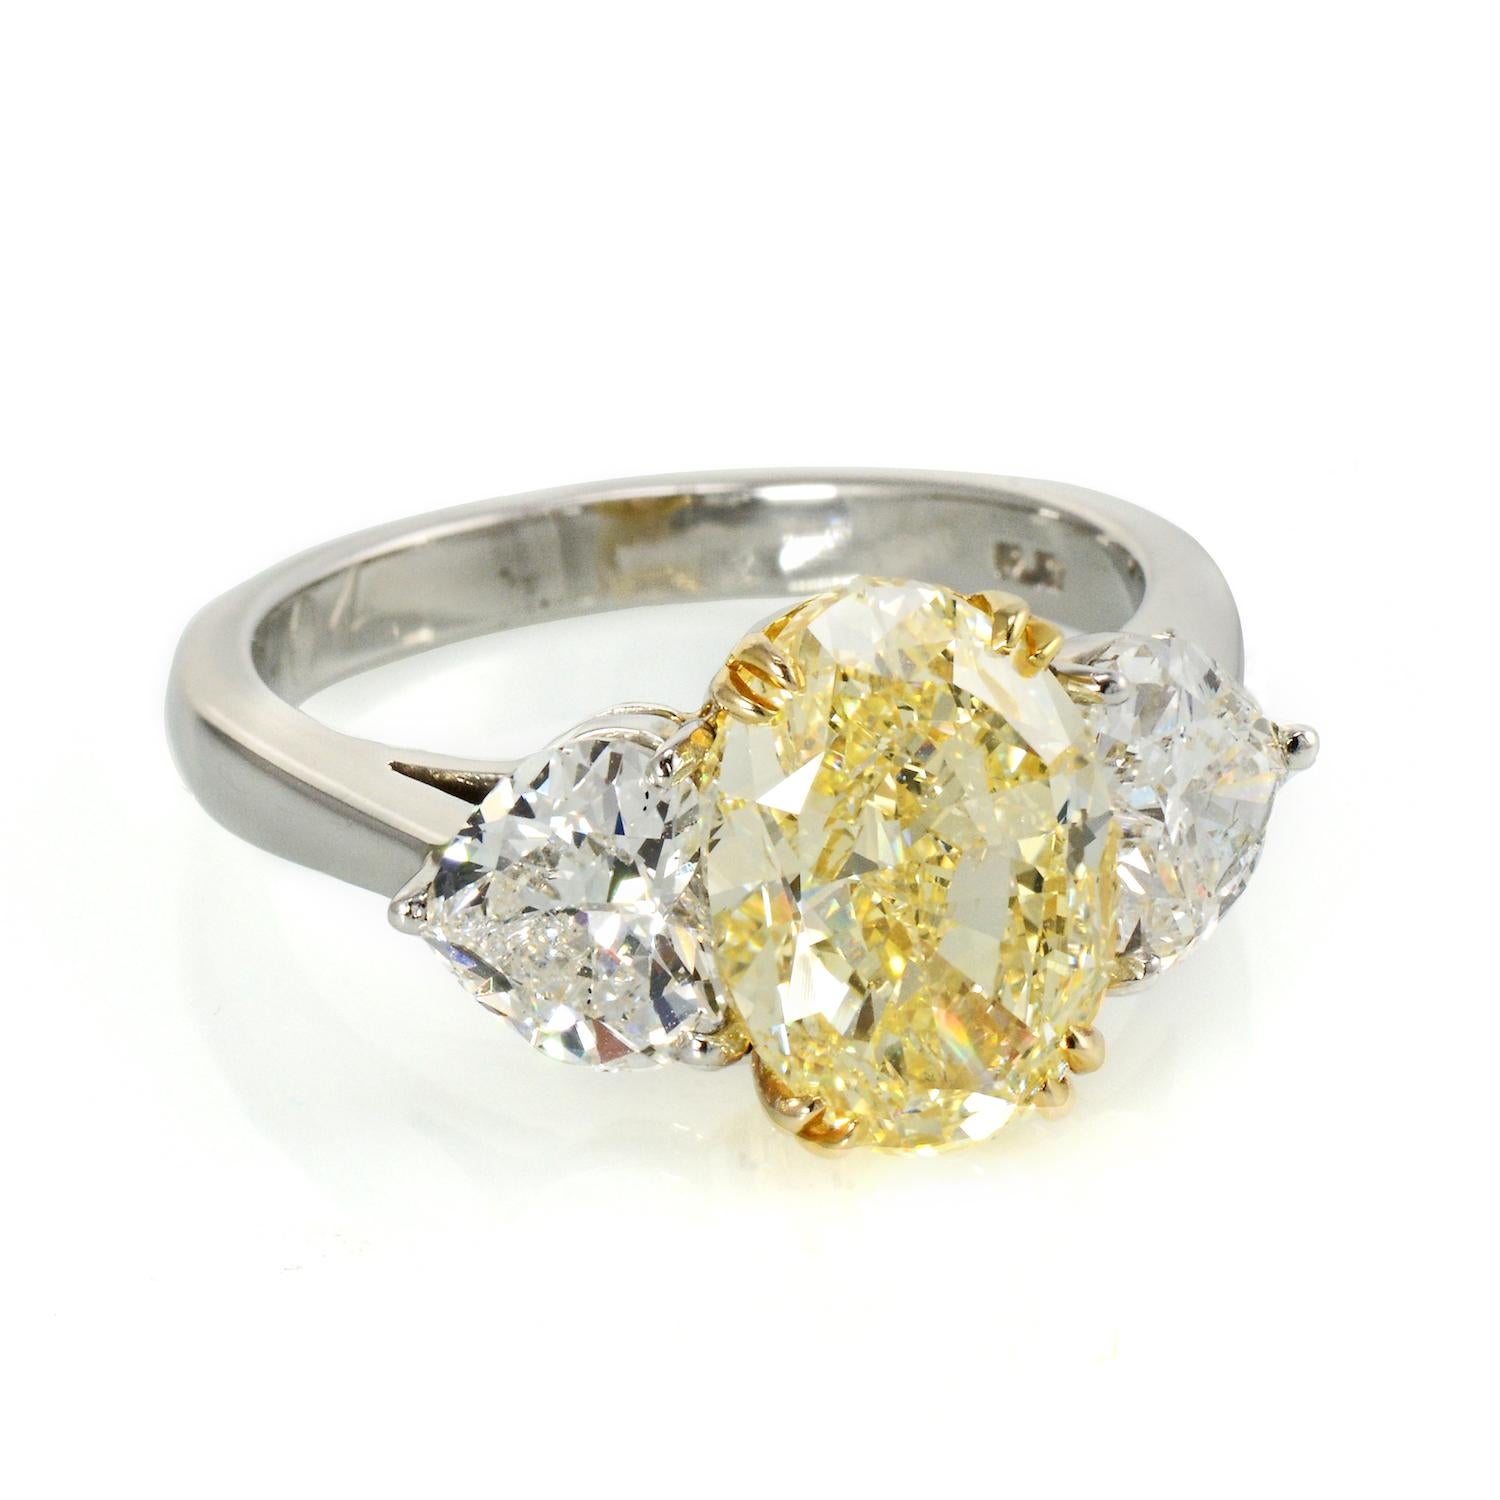 Immerse yourself in the timeless allure of this extraordinary three-stone engagement ring, a true embodiment of sophistication and style. At its heart, a dazzling 4.09-carat Natural Fancy Light Yellow Oval Cut diamond takes center stage, exuding a